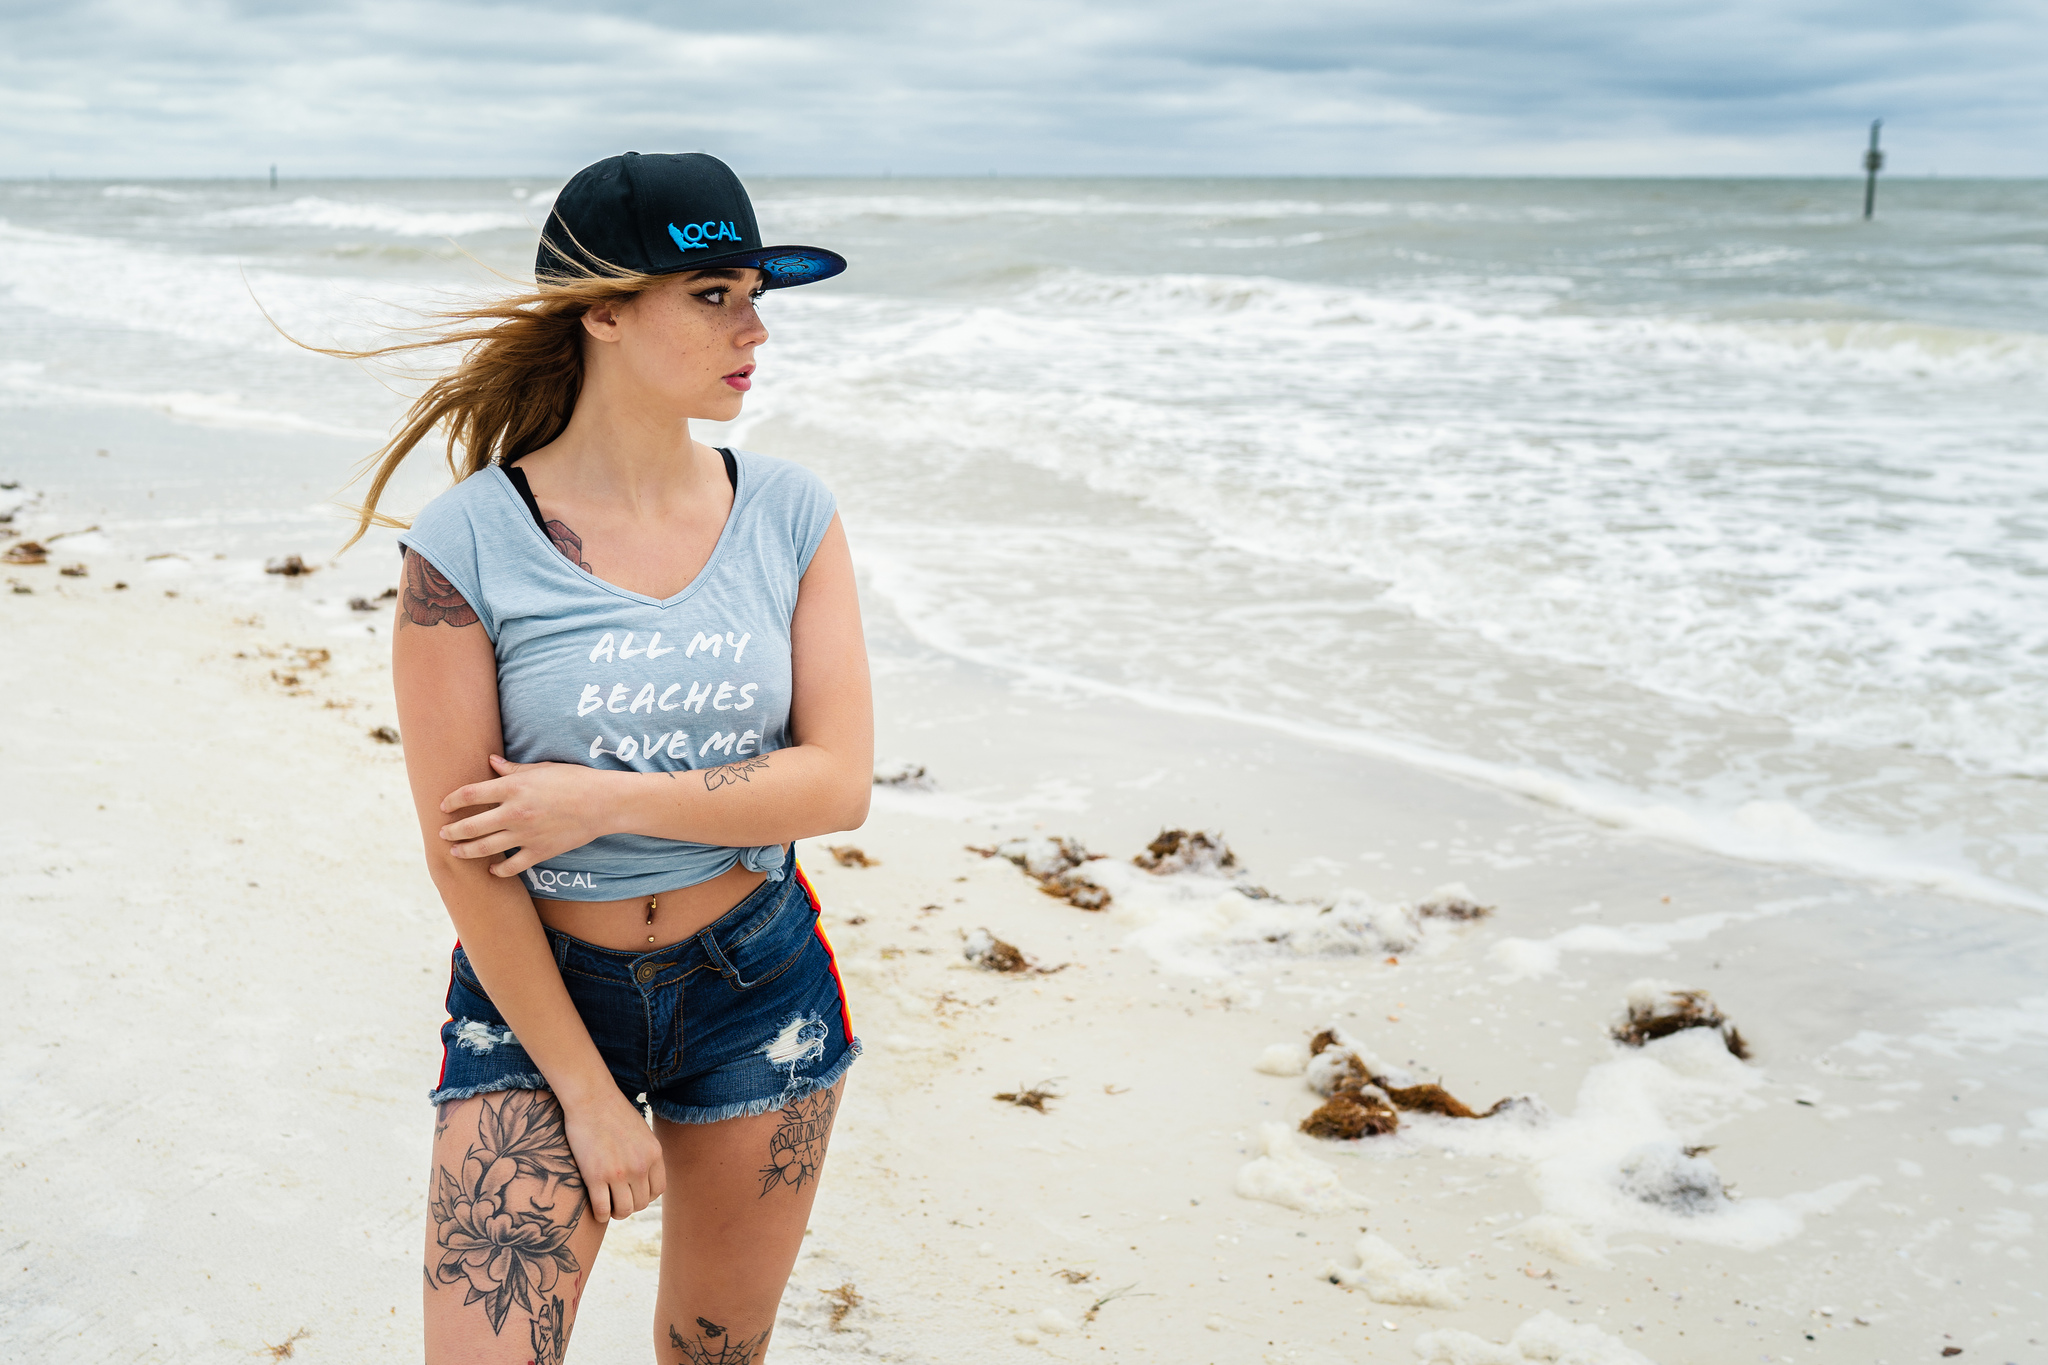 Maggie Moodie Women Model Baseball Caps Profile Looking Into The Distance Freckles T Shirt Beach Wom 2048x1365